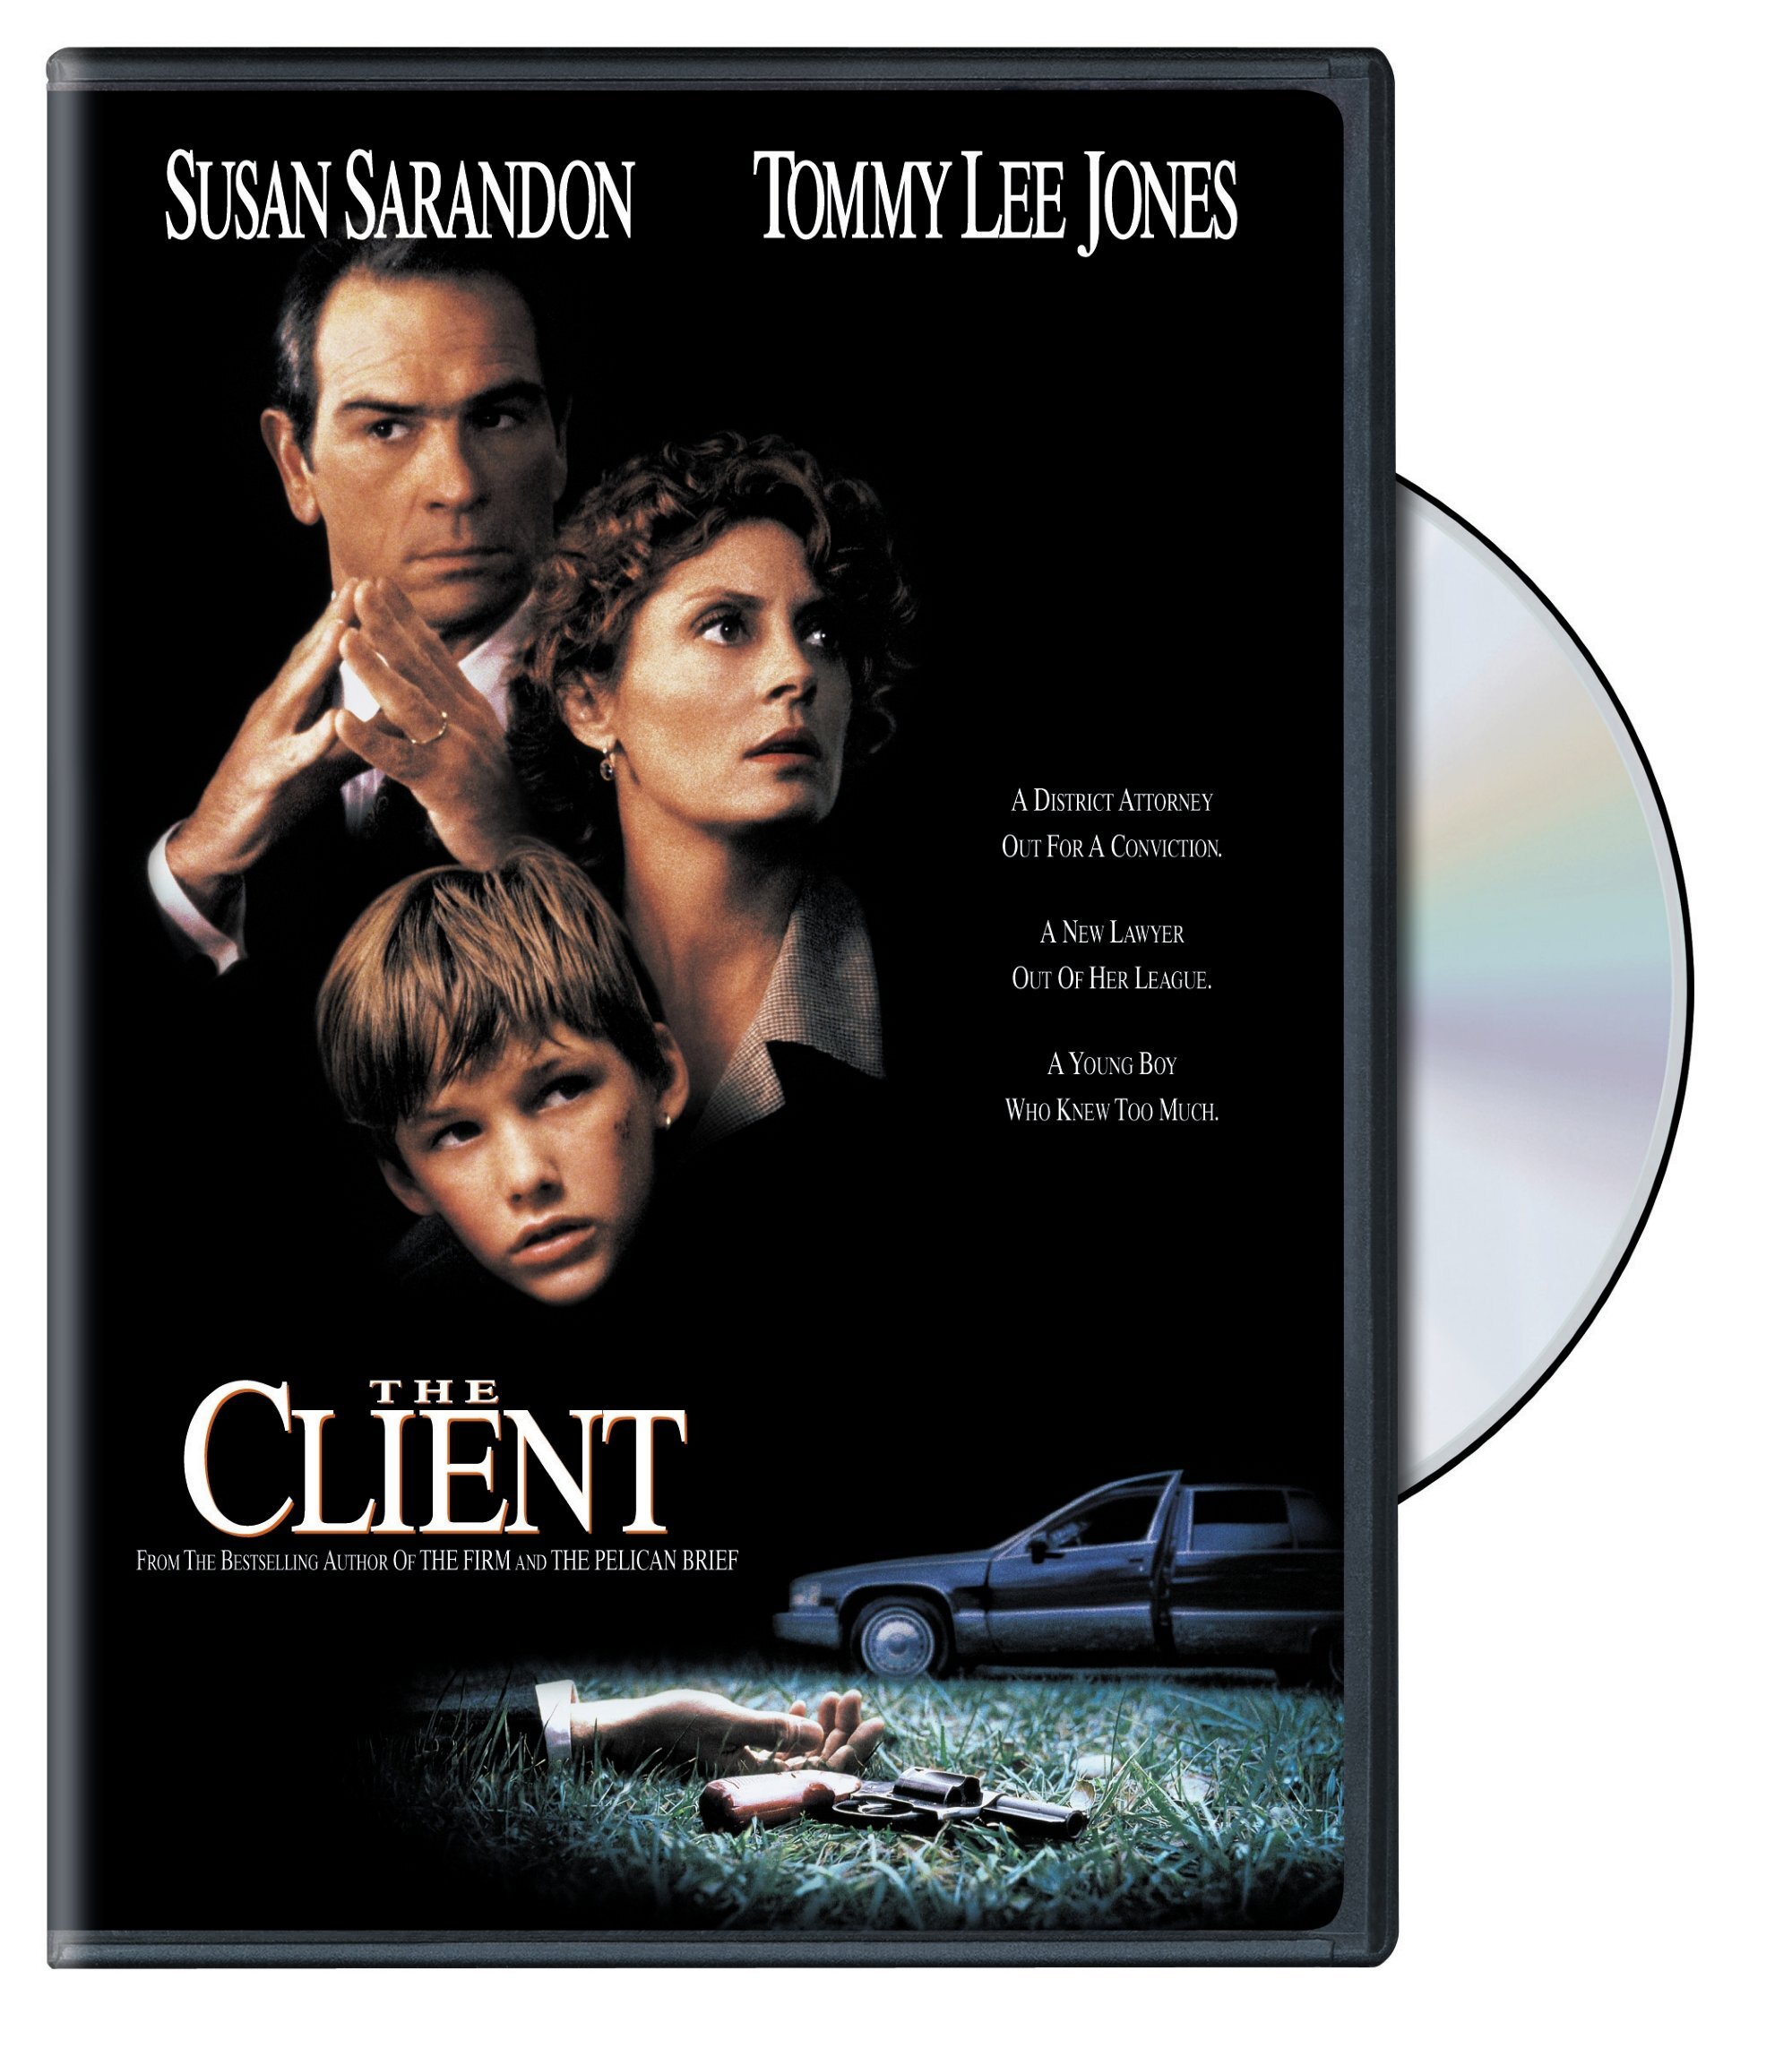 The Client (DVD New Packaging) - DVD [ 1994 ]  - Thriller Movies On DVD - Movies On GRUV